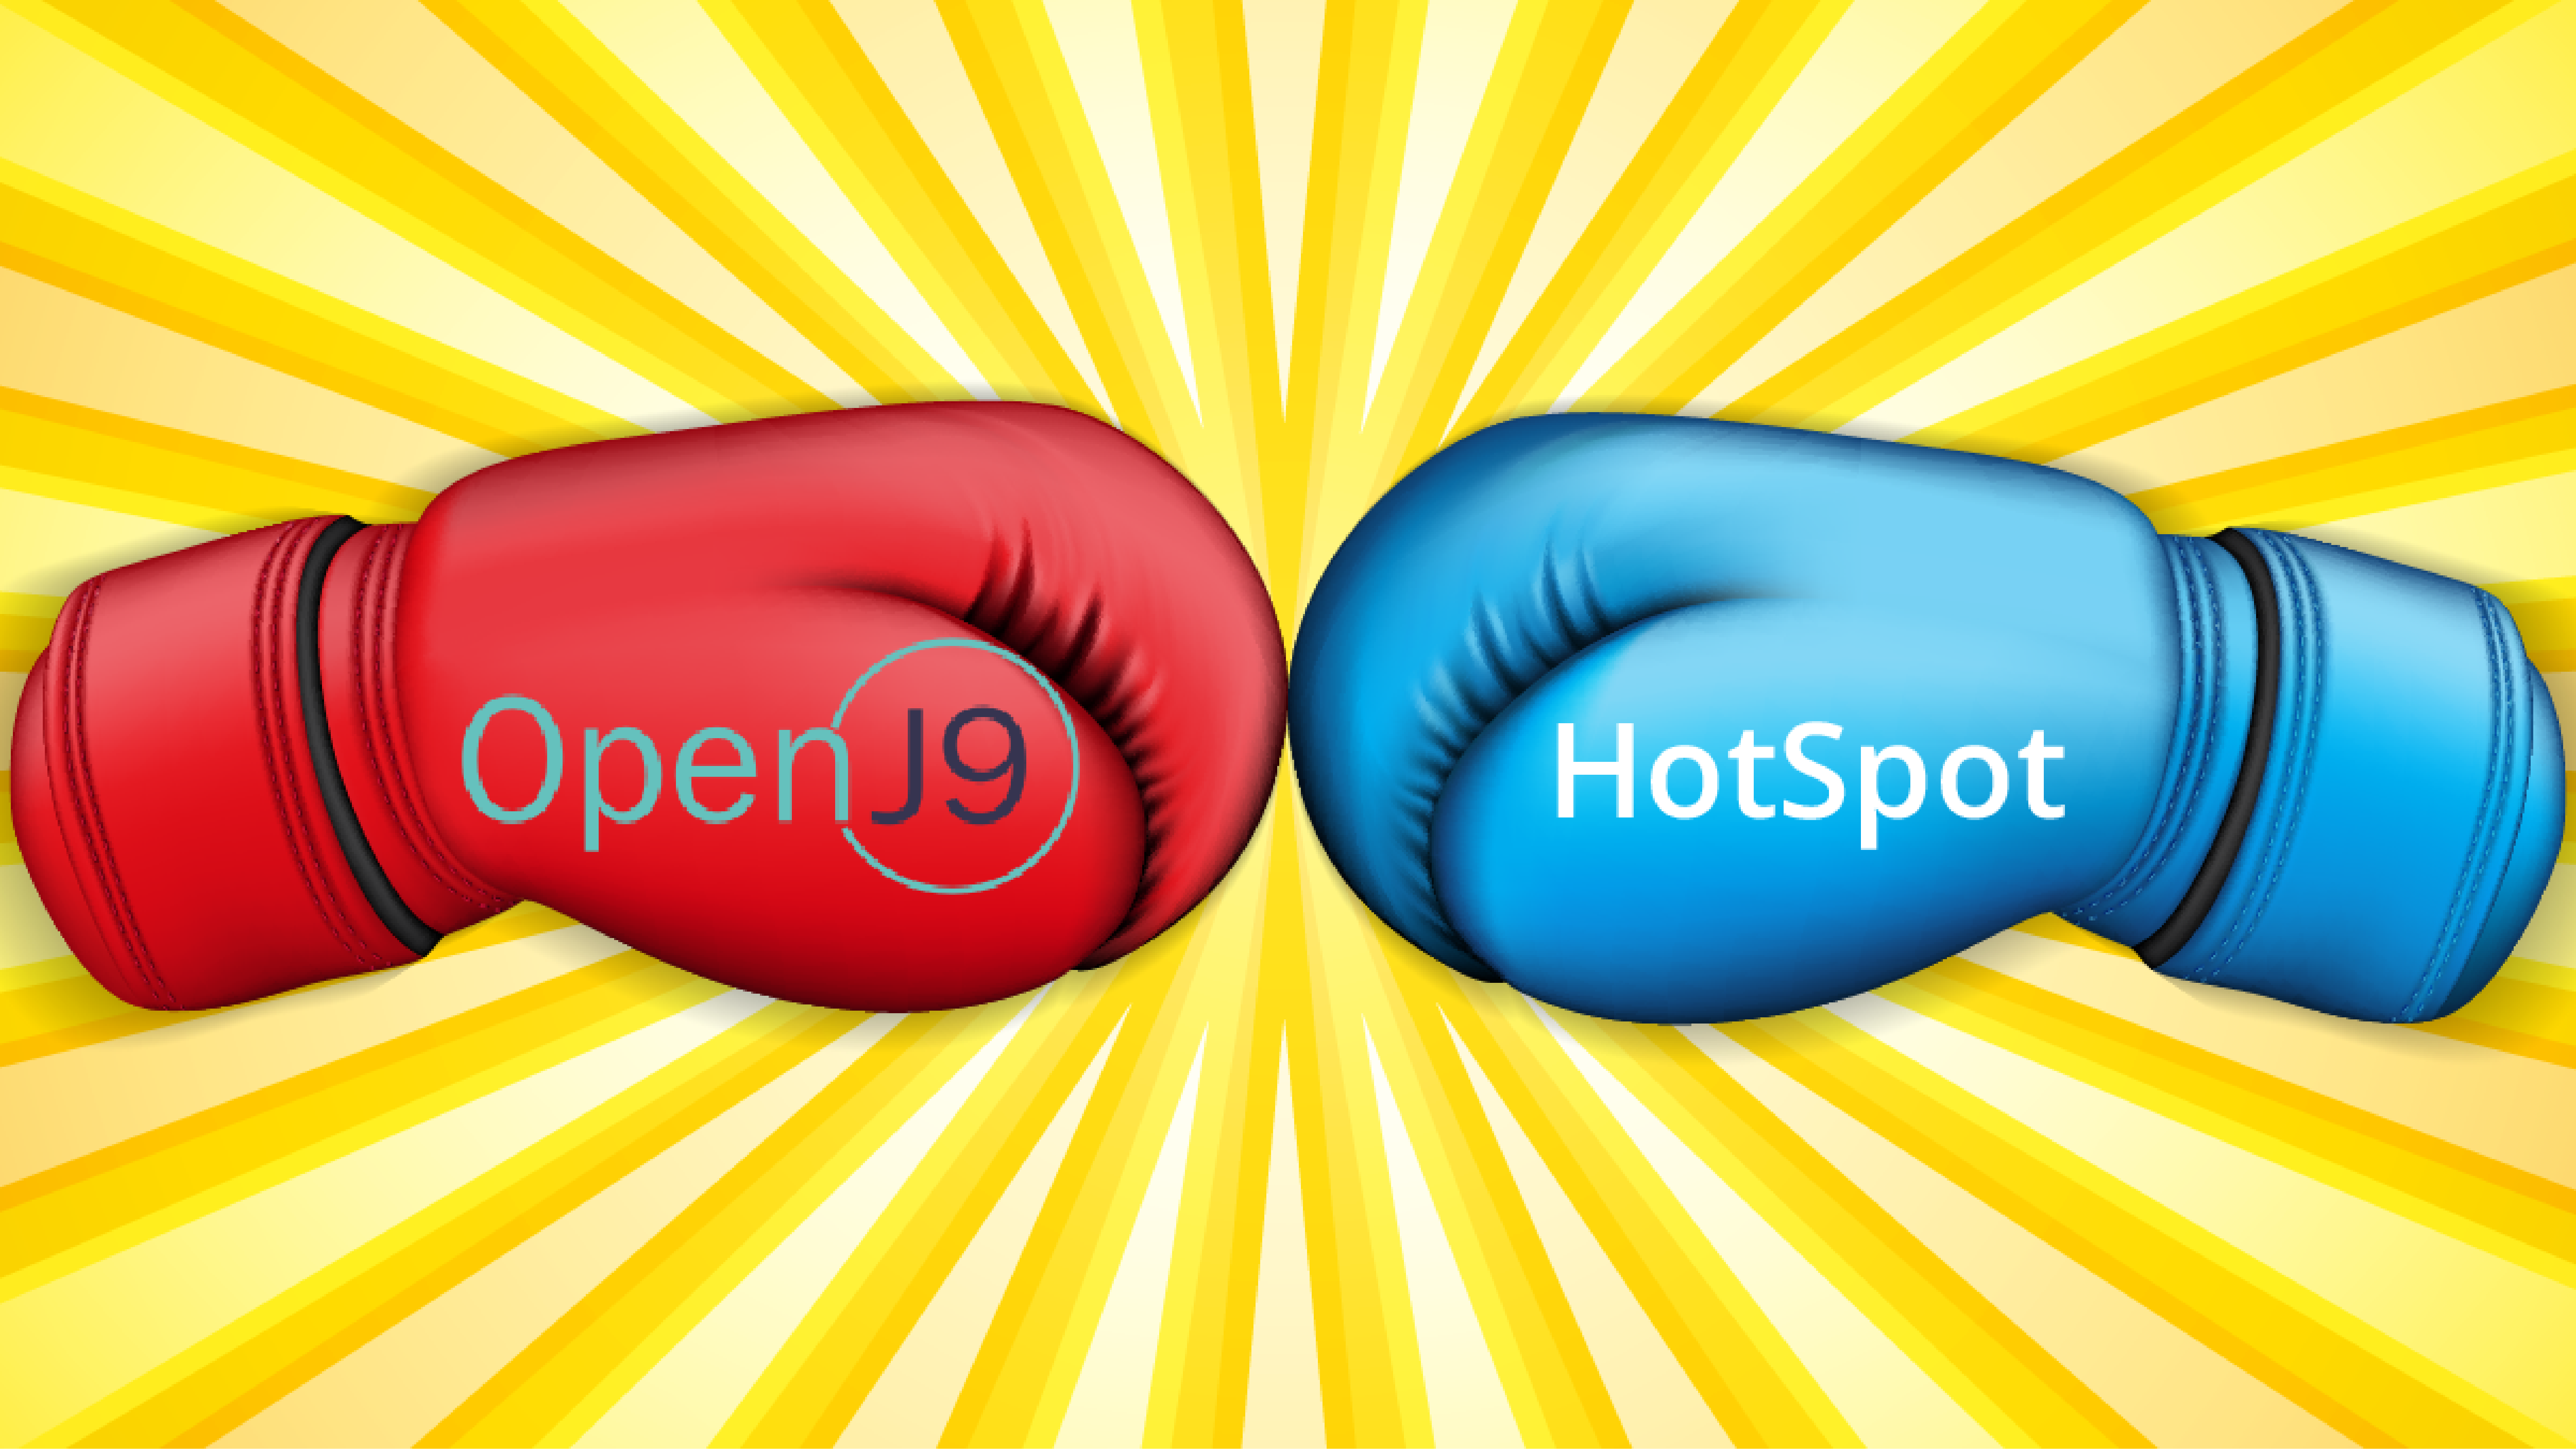 HotSpot vs OpenJ9: which one to choose to cut cloud bills